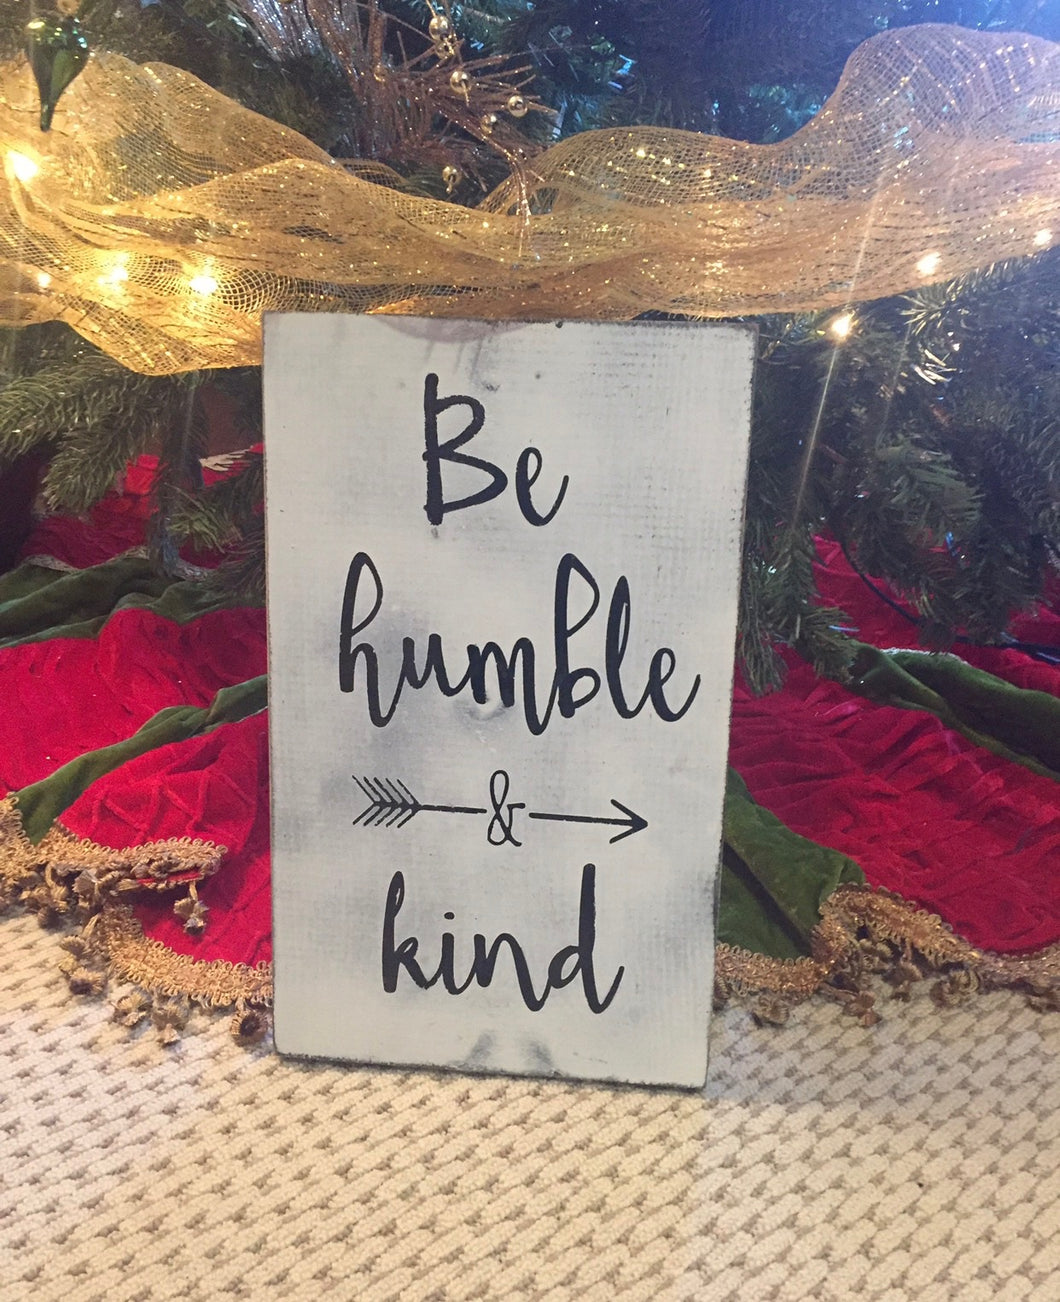 Be humble & kind sign - Family sign - Wood sign - Rustic wood sign - Christmas gift - Home decor - Knot In Your House